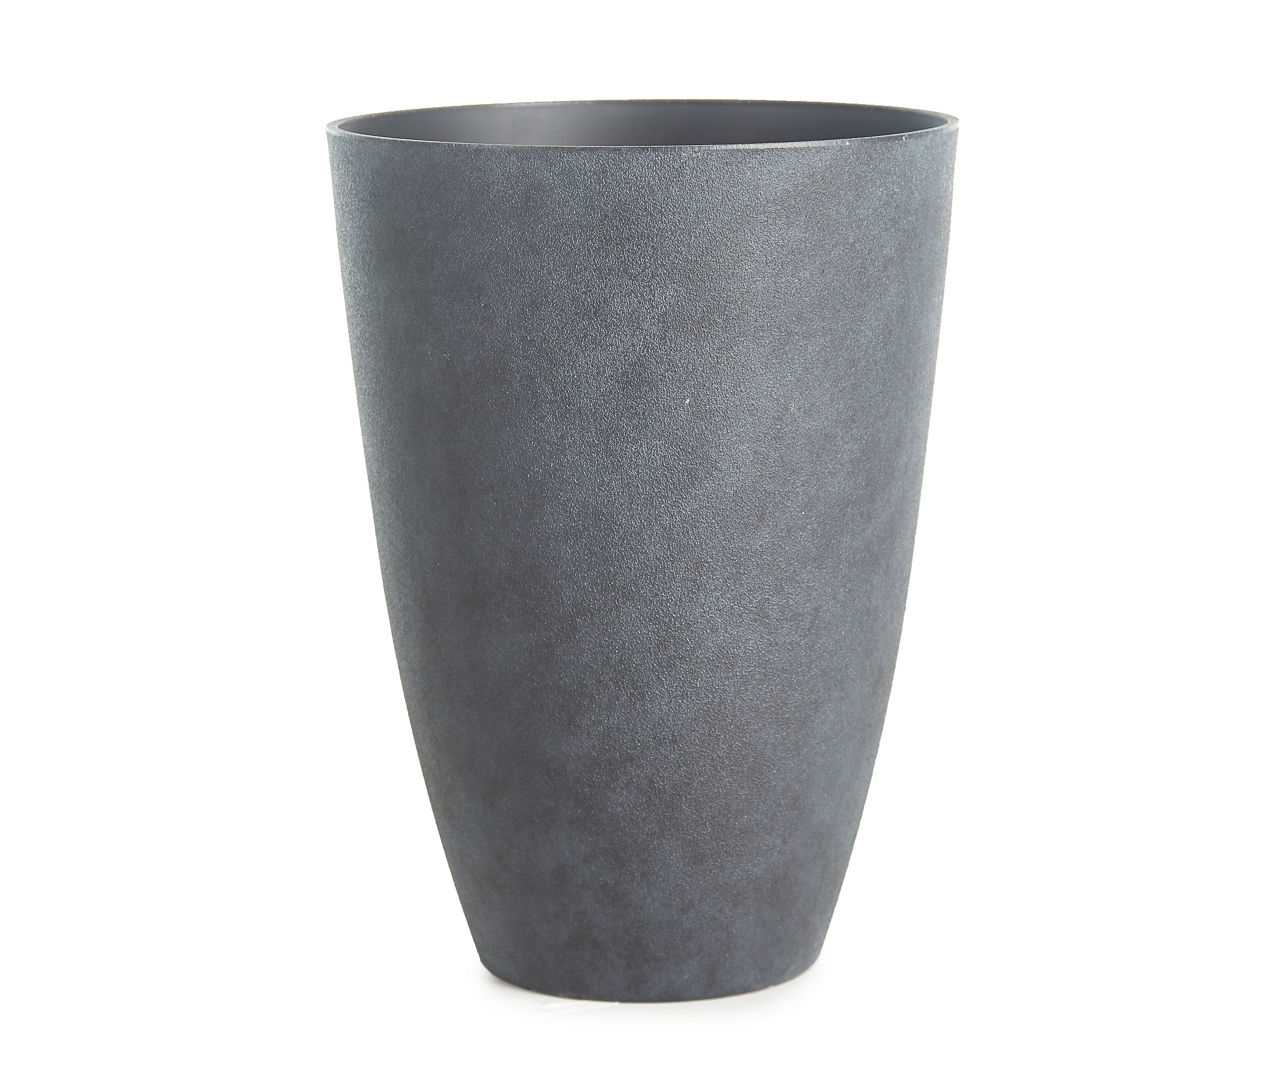 16IN TALL CHARCOAL FAUX CONCRETE PLANTER